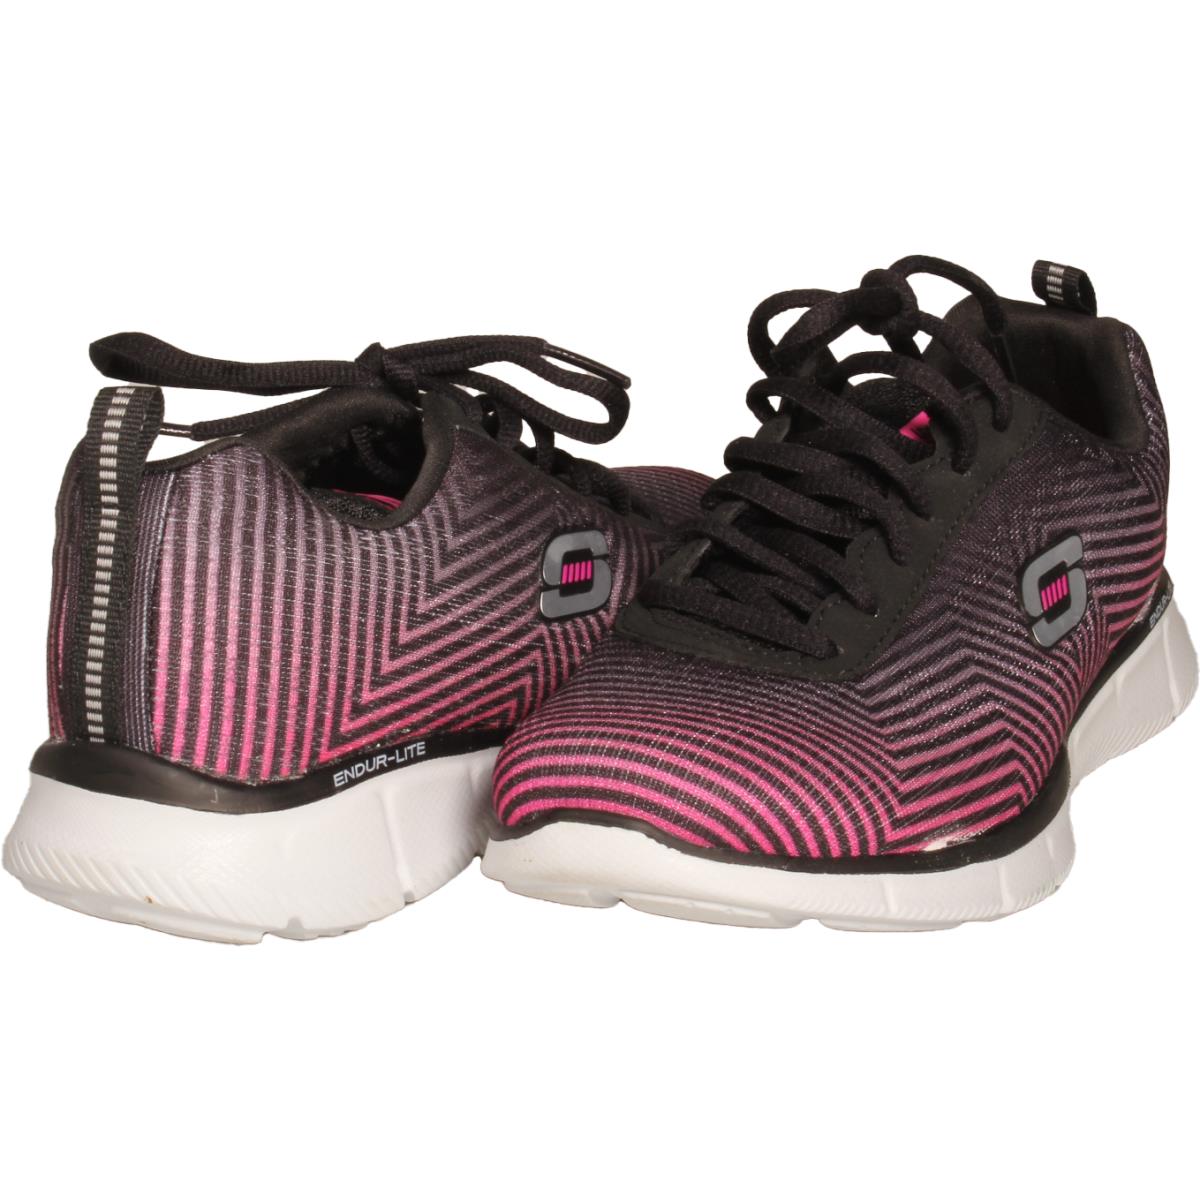 Skechers Equalizer Expect Miracles Womens Sneaker Black Pink US Size 6.5